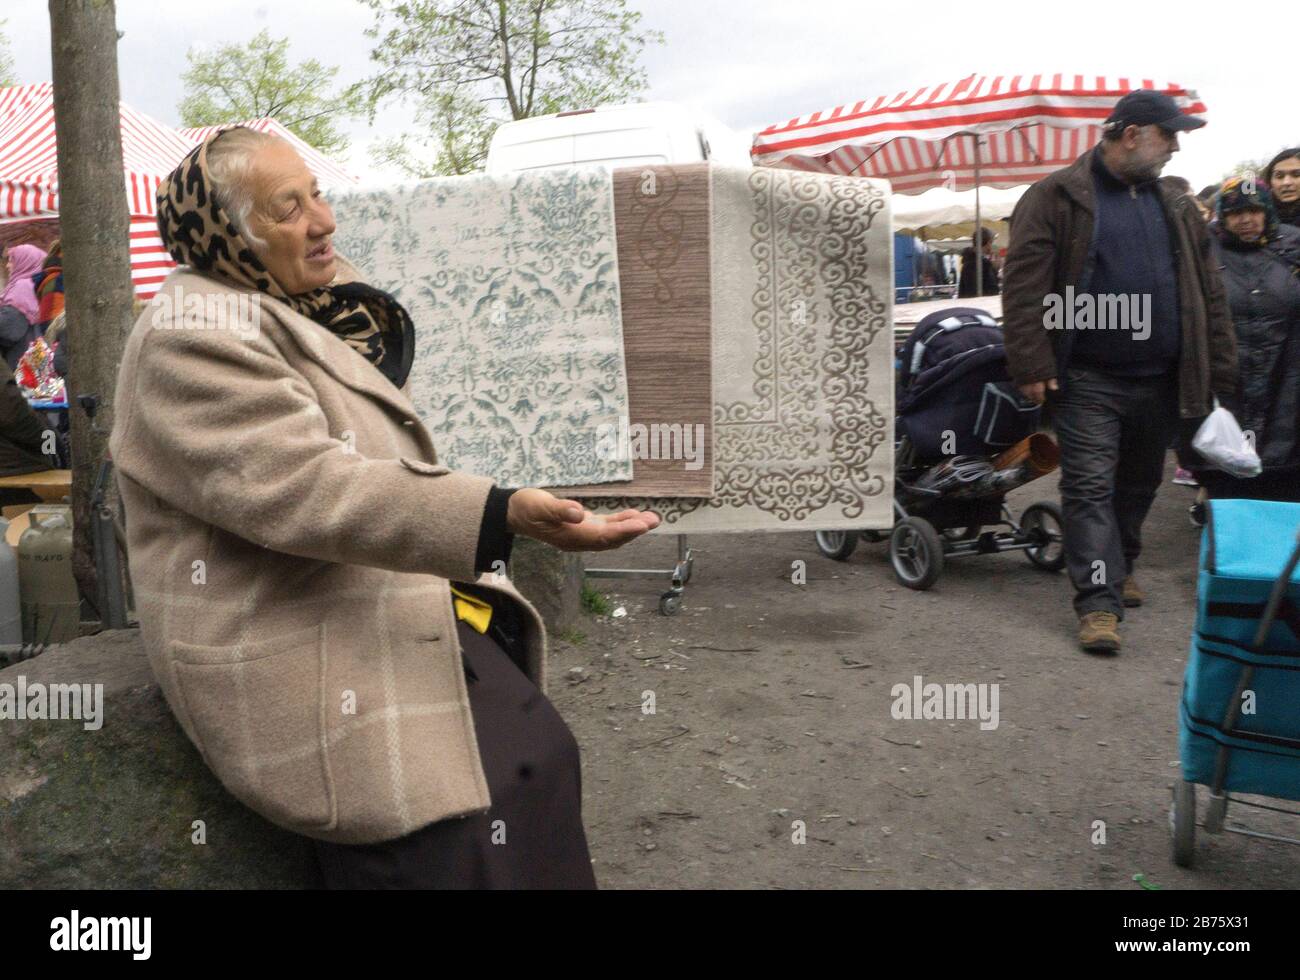 Begging Roma woman at a flea market in Gelsenkirchen, 22.04.2017. With an unemployment rate of 14% (January 2017) and a foreigner share of almost 20%, the city of Gelsenkirchen is facing great social problems. [automated translation] Stock Photo